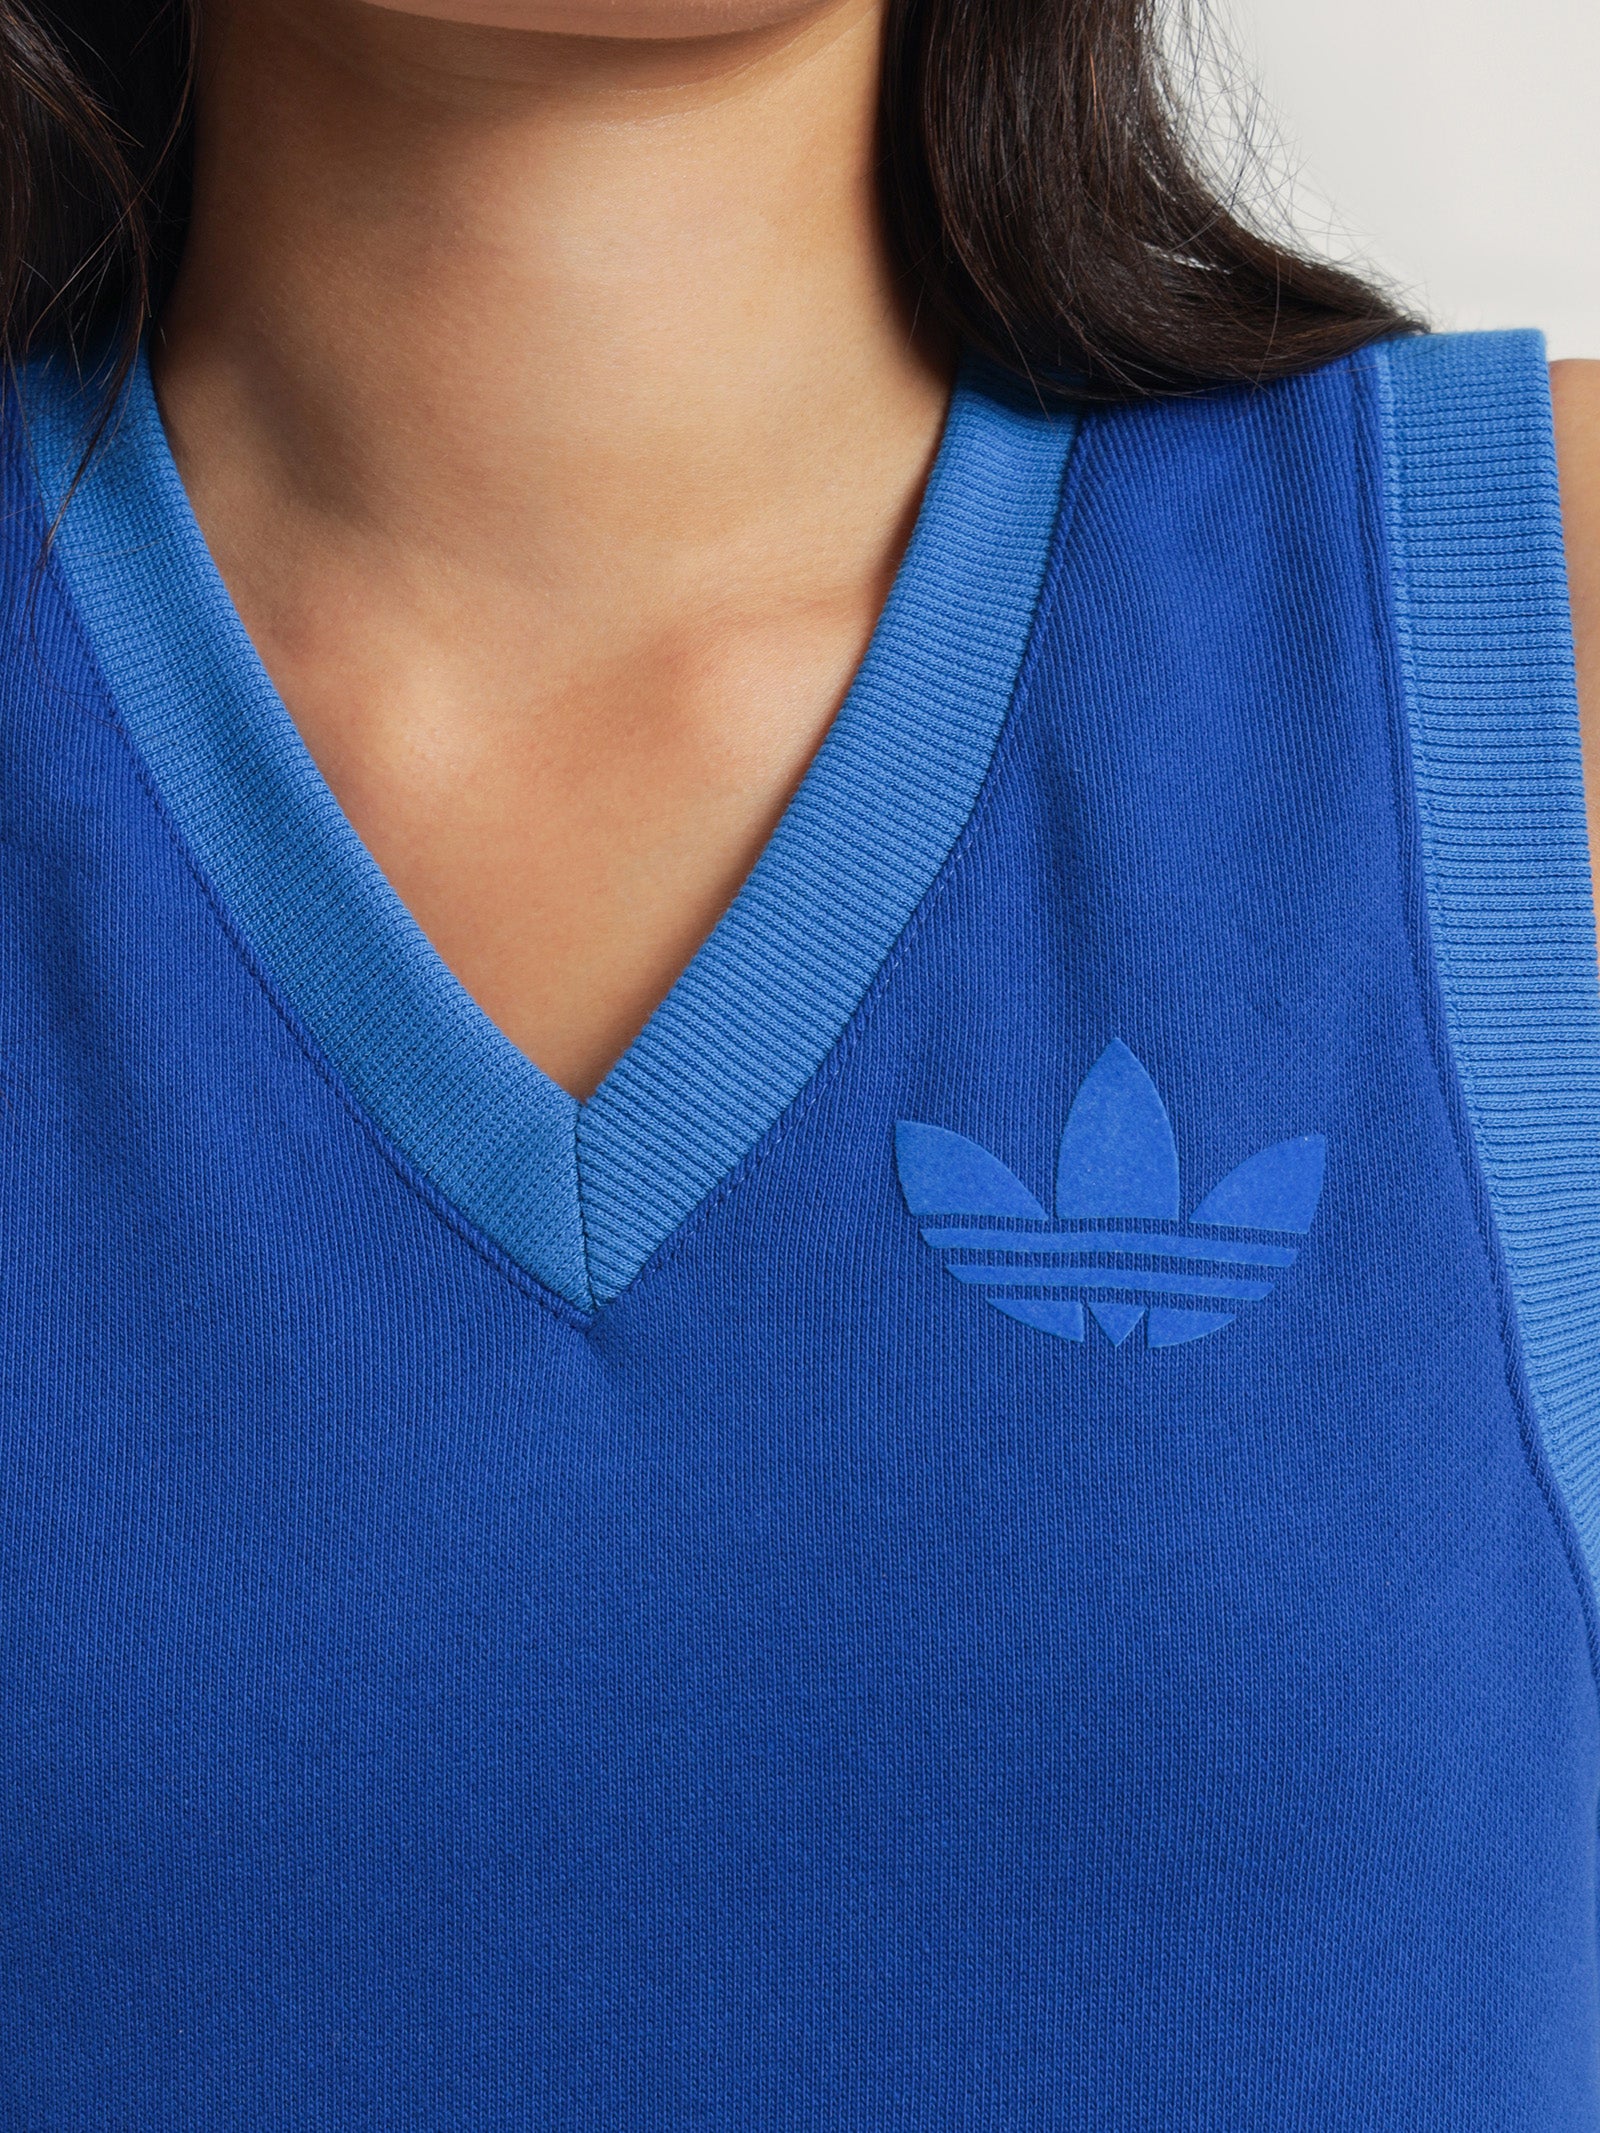 ADICOLOR 70s Heritage Now Sweater Vest in Royal Blue